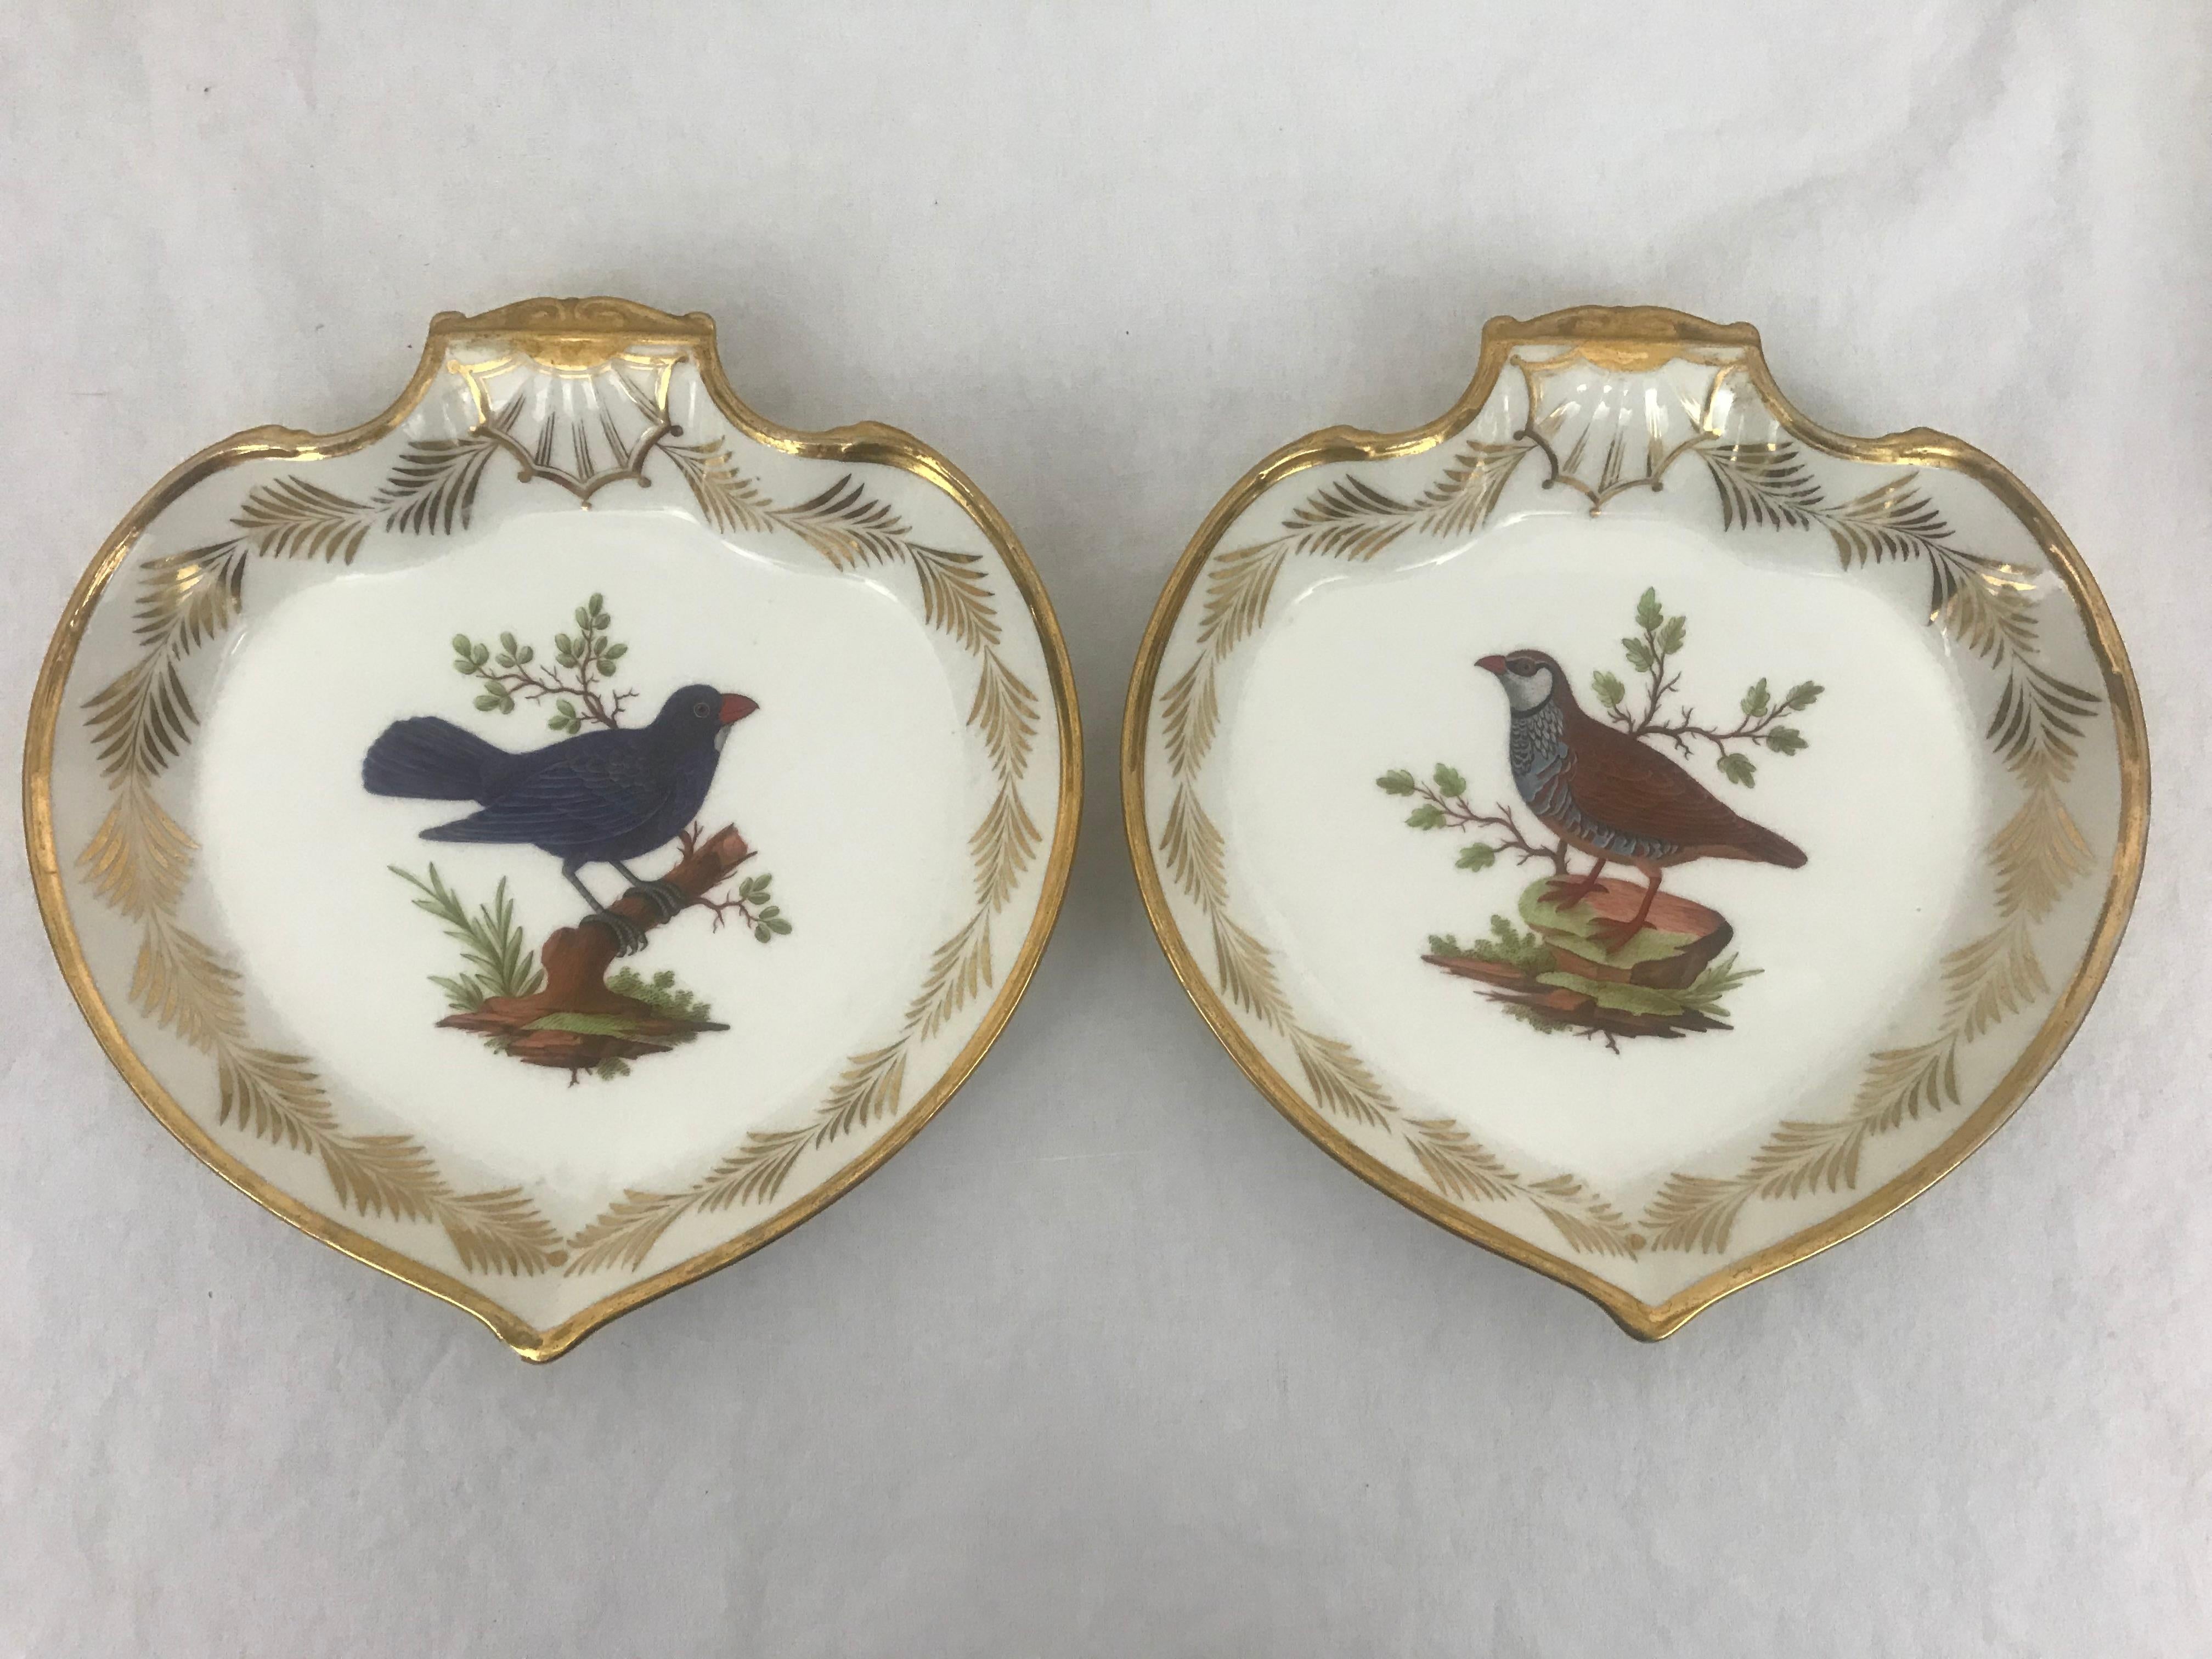 Rare and Important Group of Old Paris Porcelain by Nast Porcelain In Fair Condition For Sale In Seattle, WA